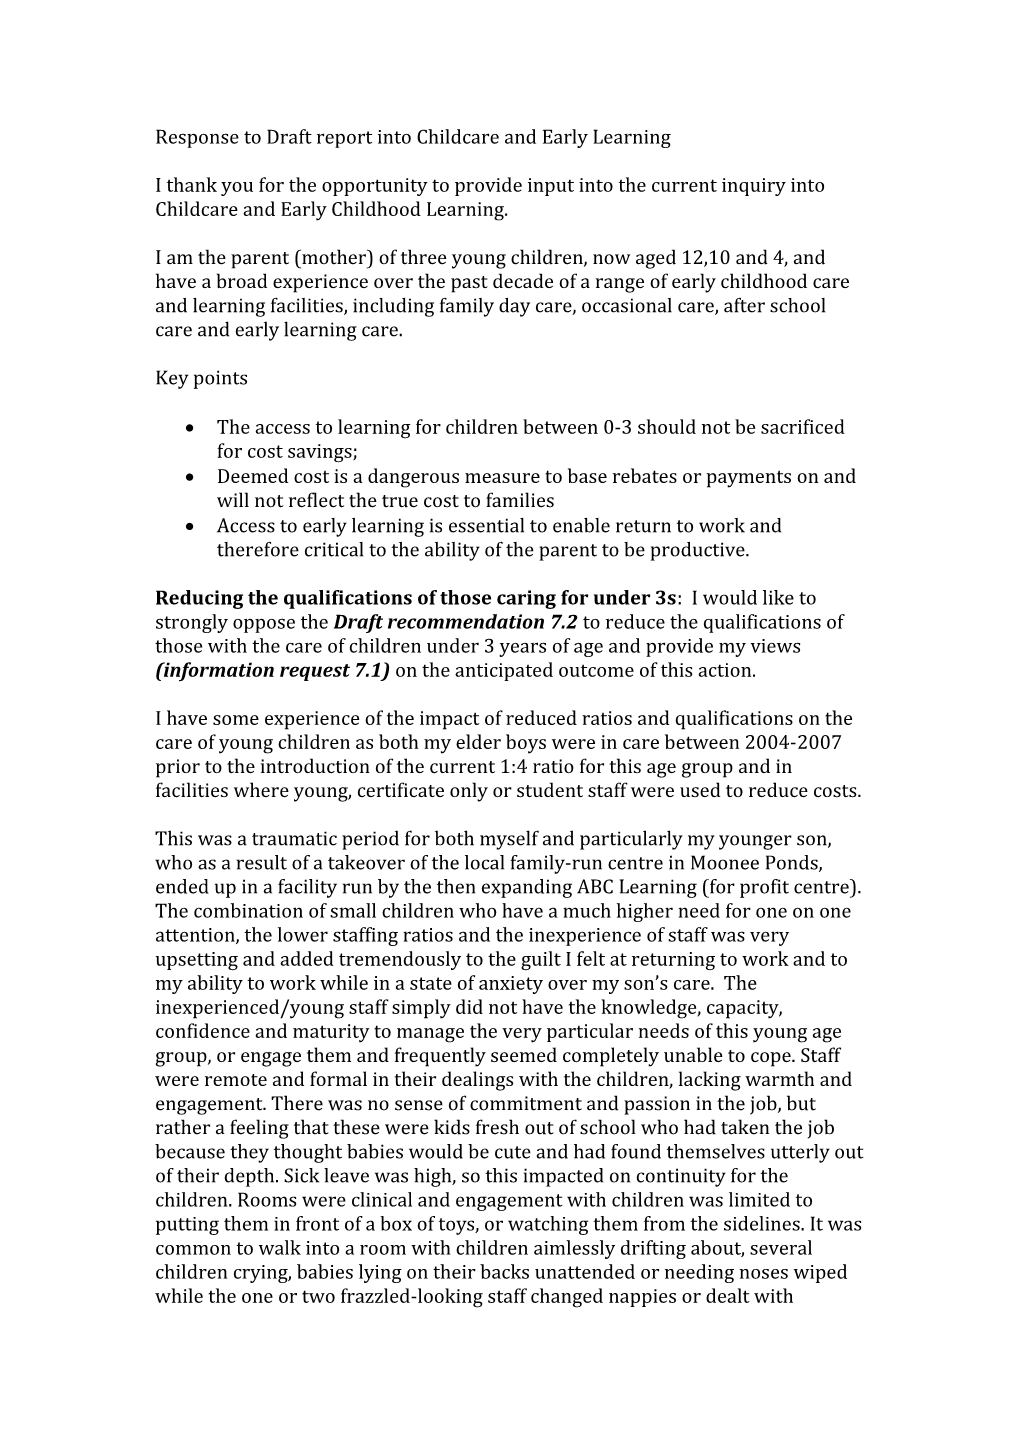 Submission DR716 - Alison Barber - Childcare and Early Childhood Learning - Public Inquiry